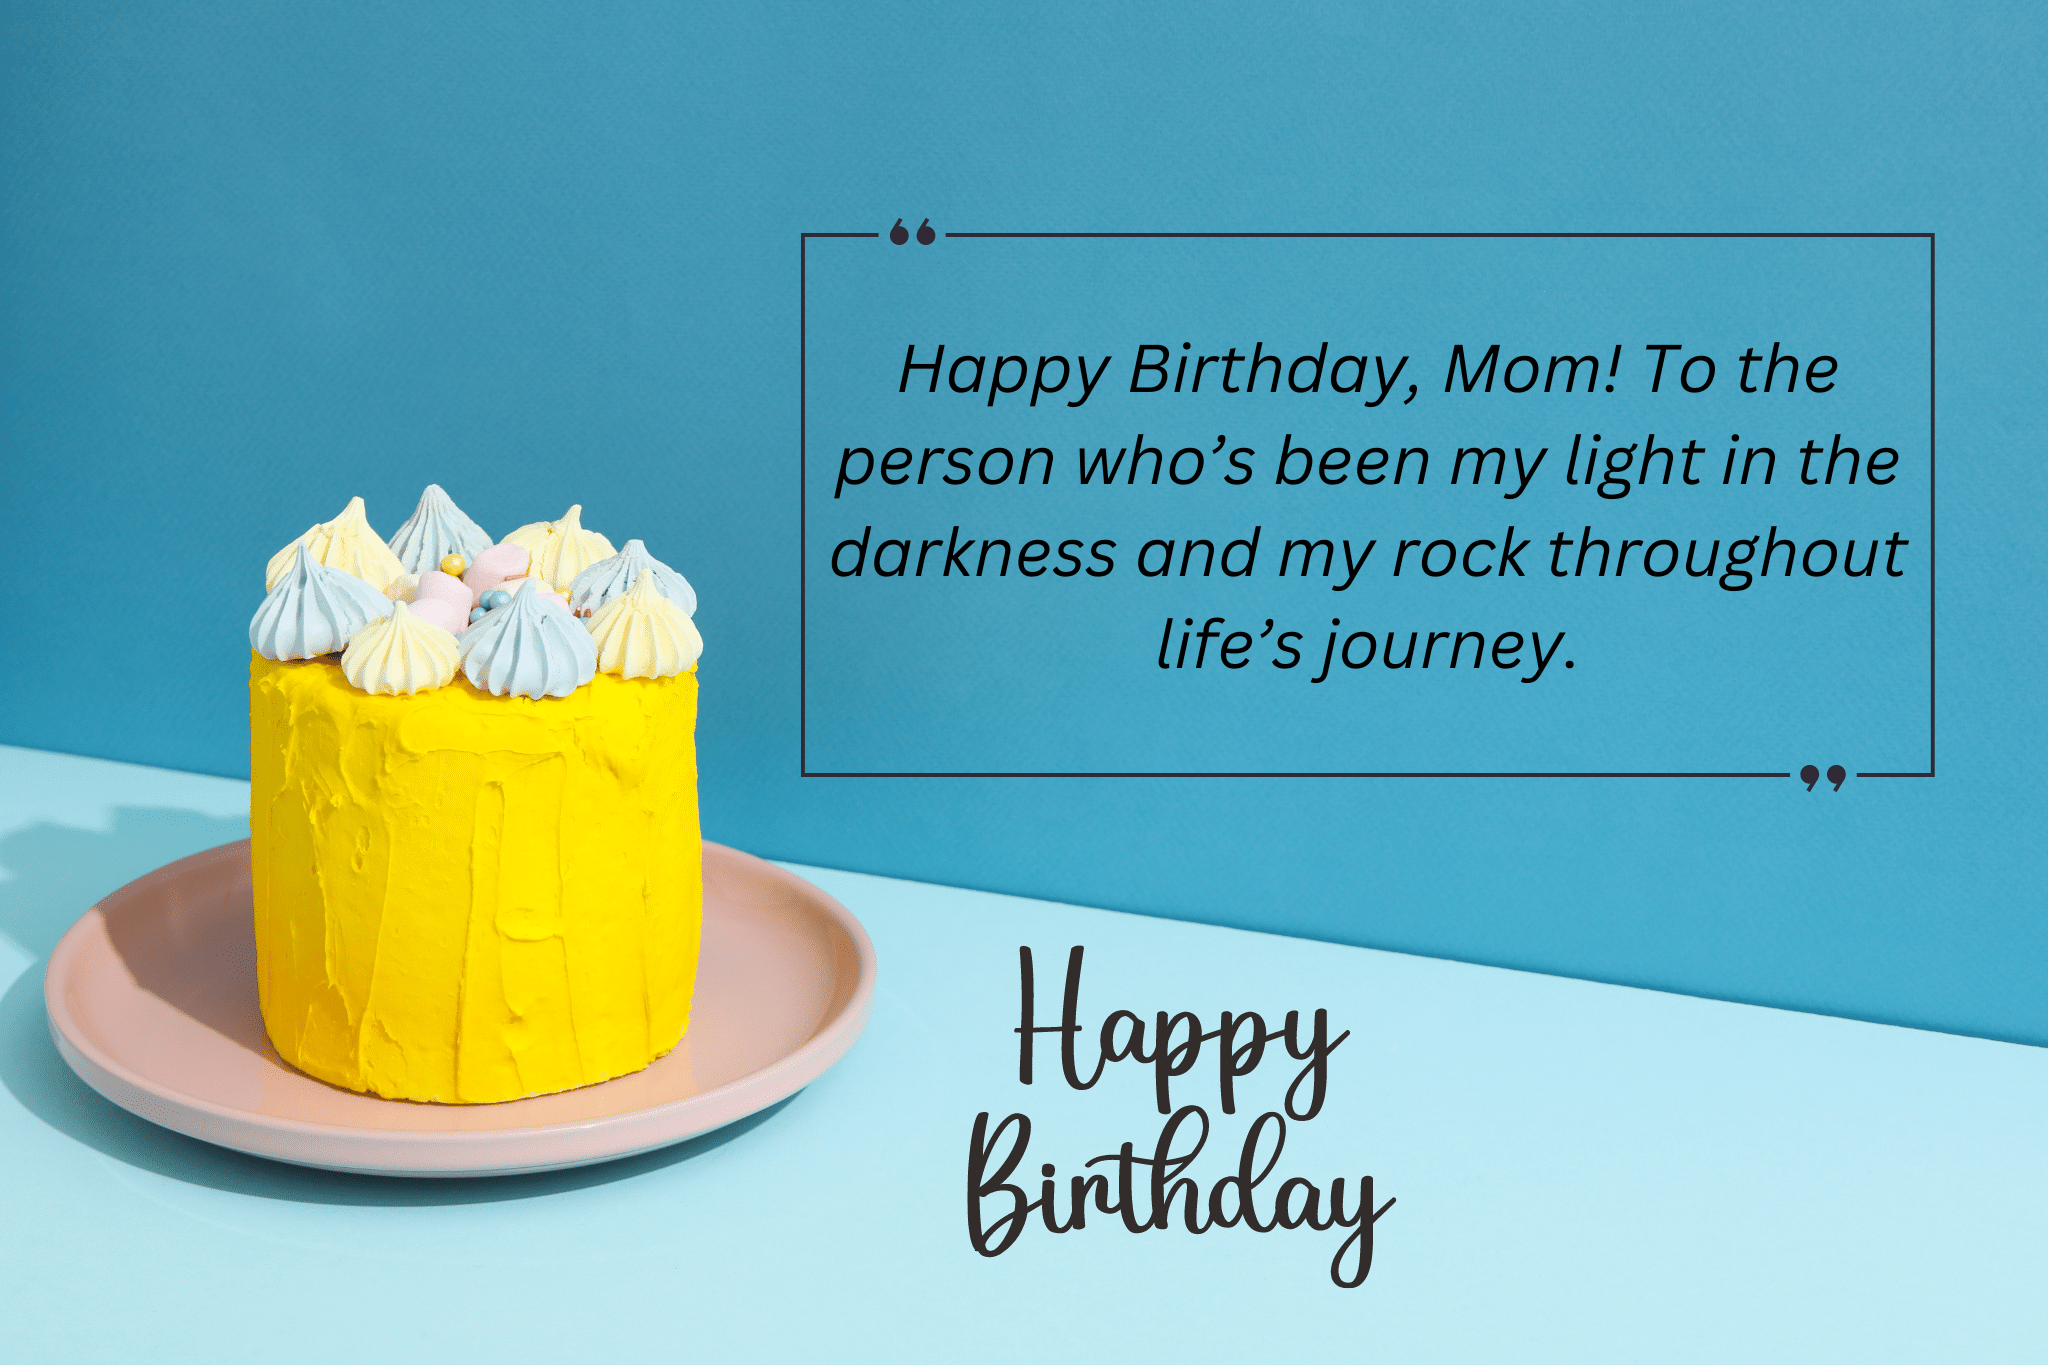 happy birthday, mom! to the person who’s been my light in the darkness and my rock throughout life’s journey.